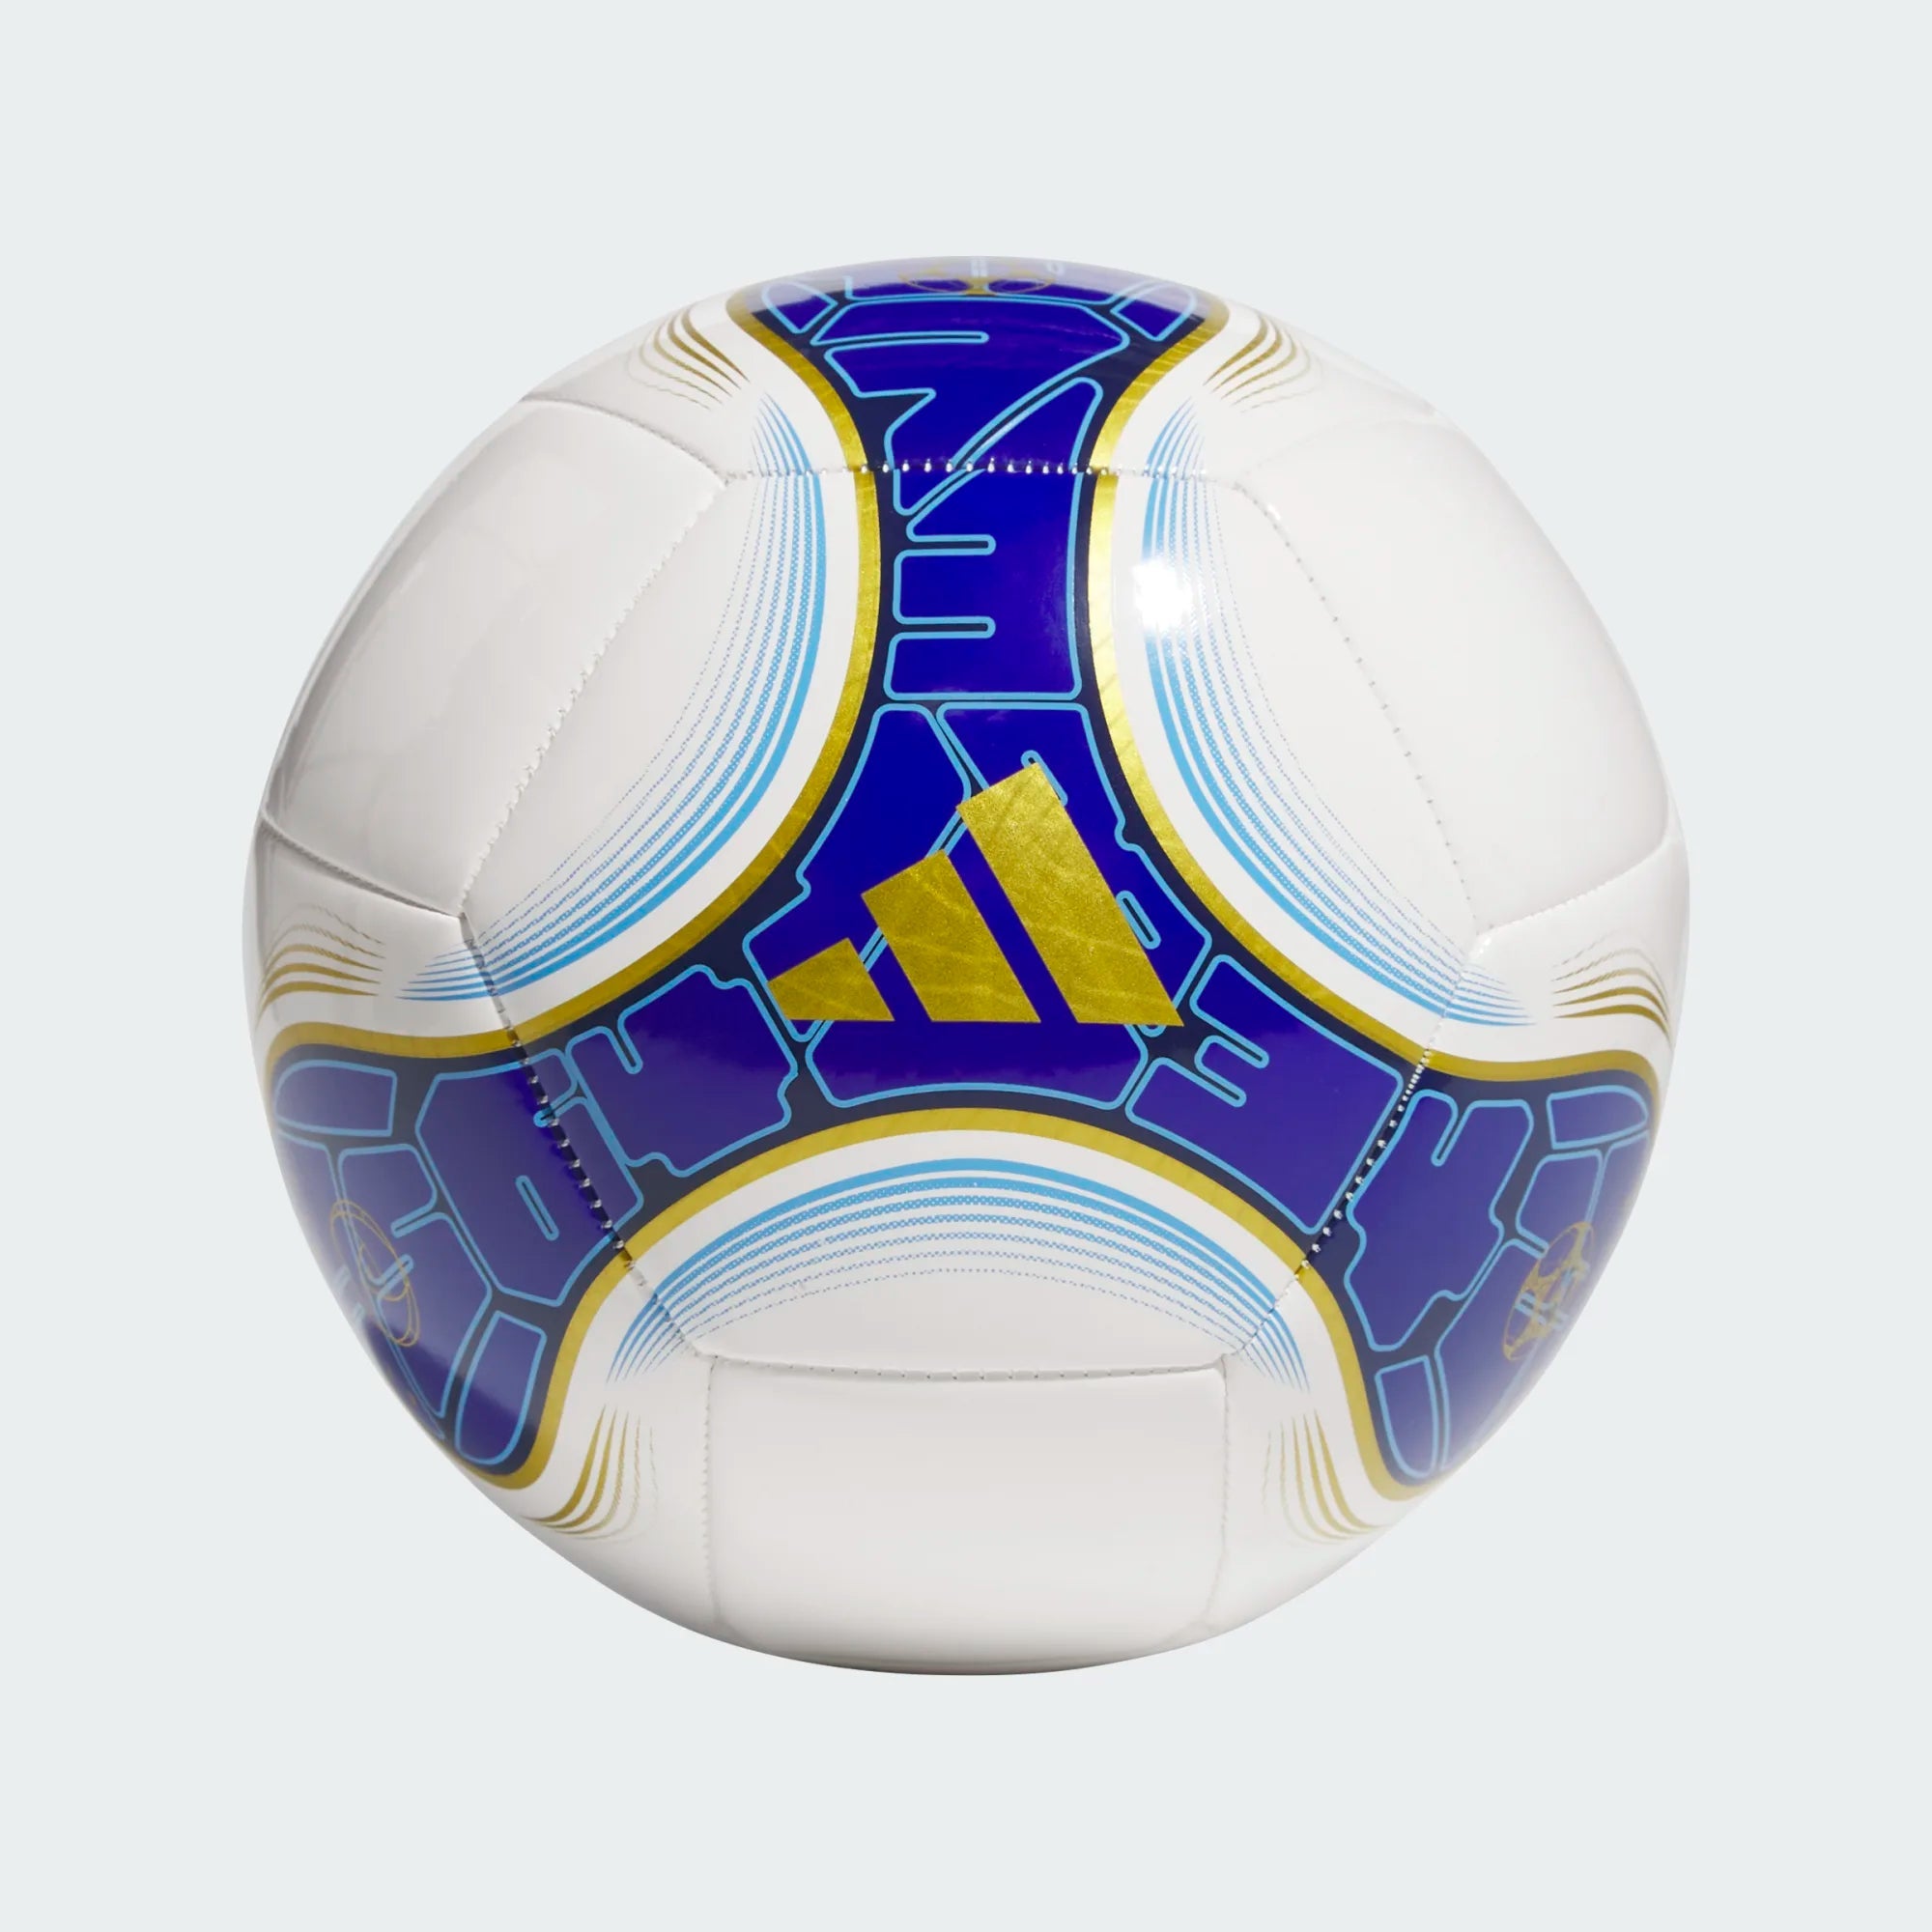 Adidas Messi Club Soccer Ball-Adidas-Sports Replay - Sports Excellence